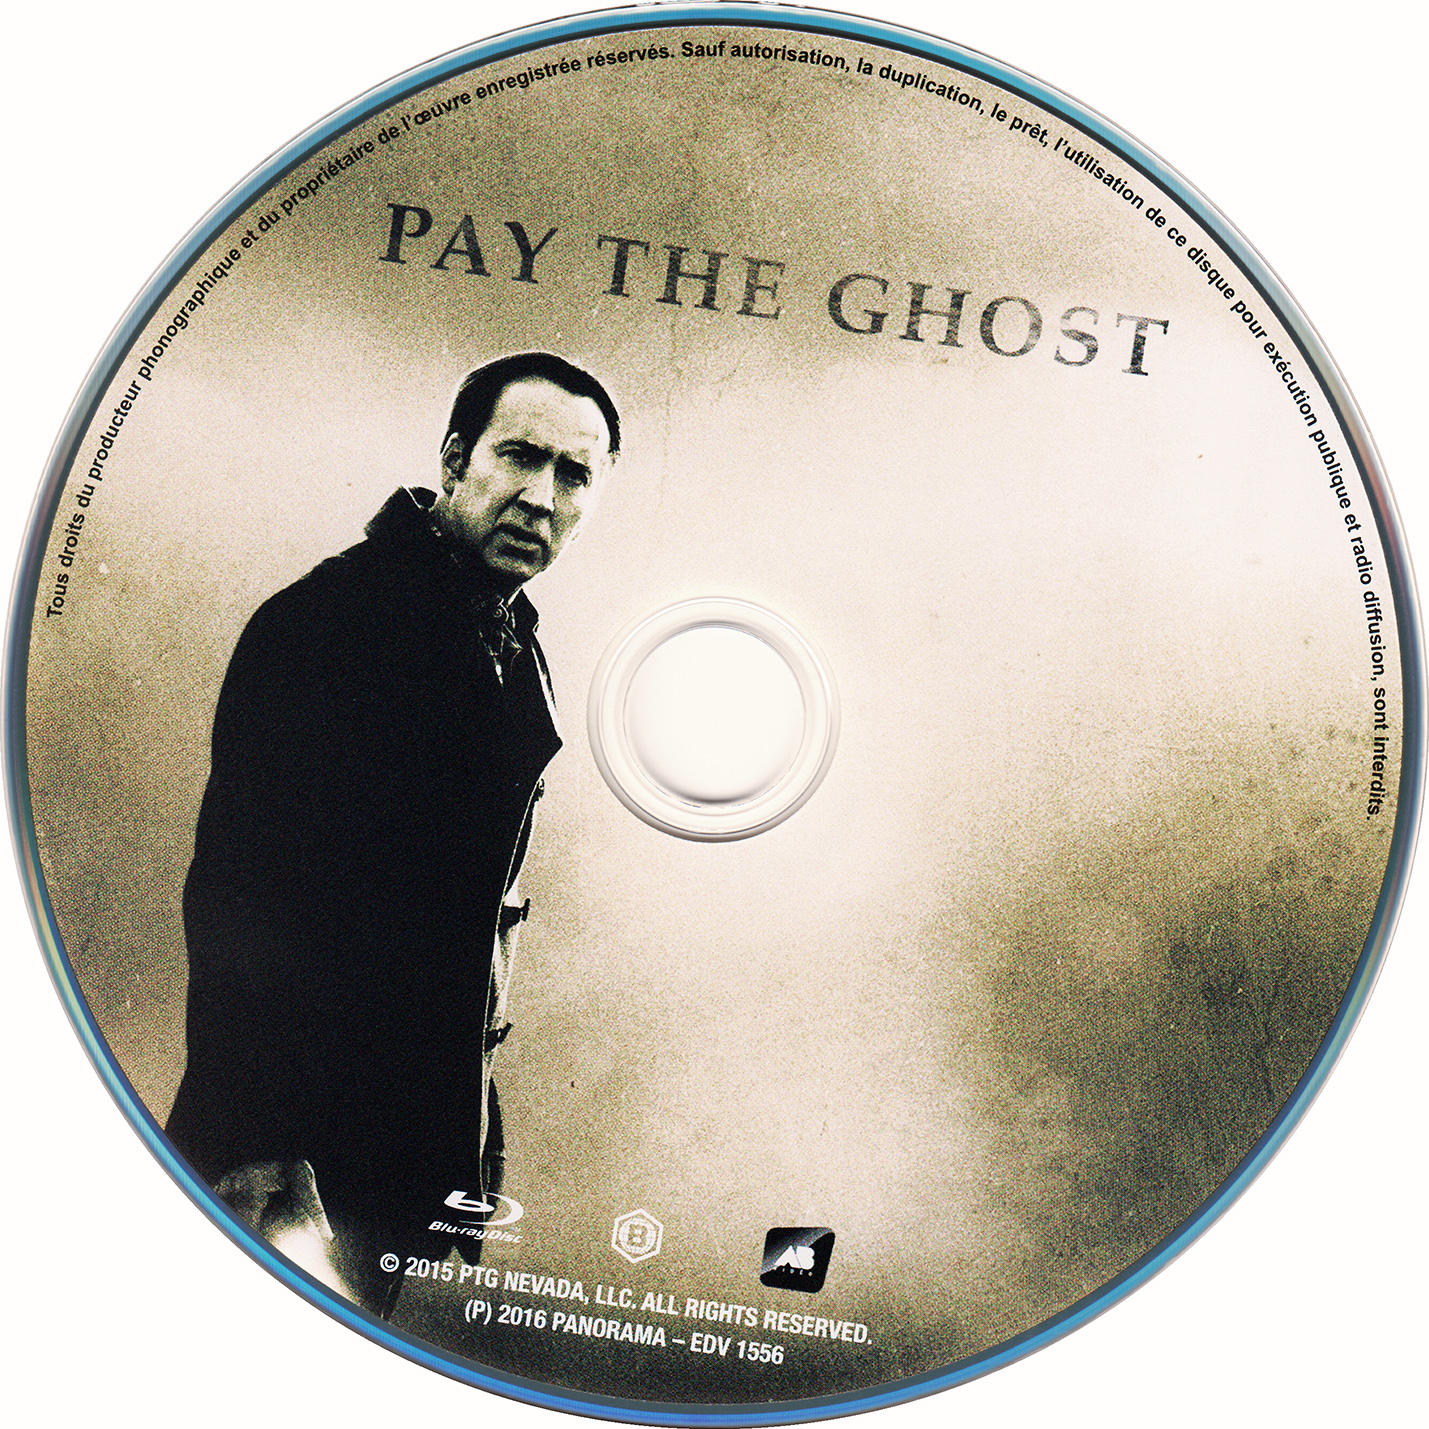 Pay the ghost (BLU-RAY)